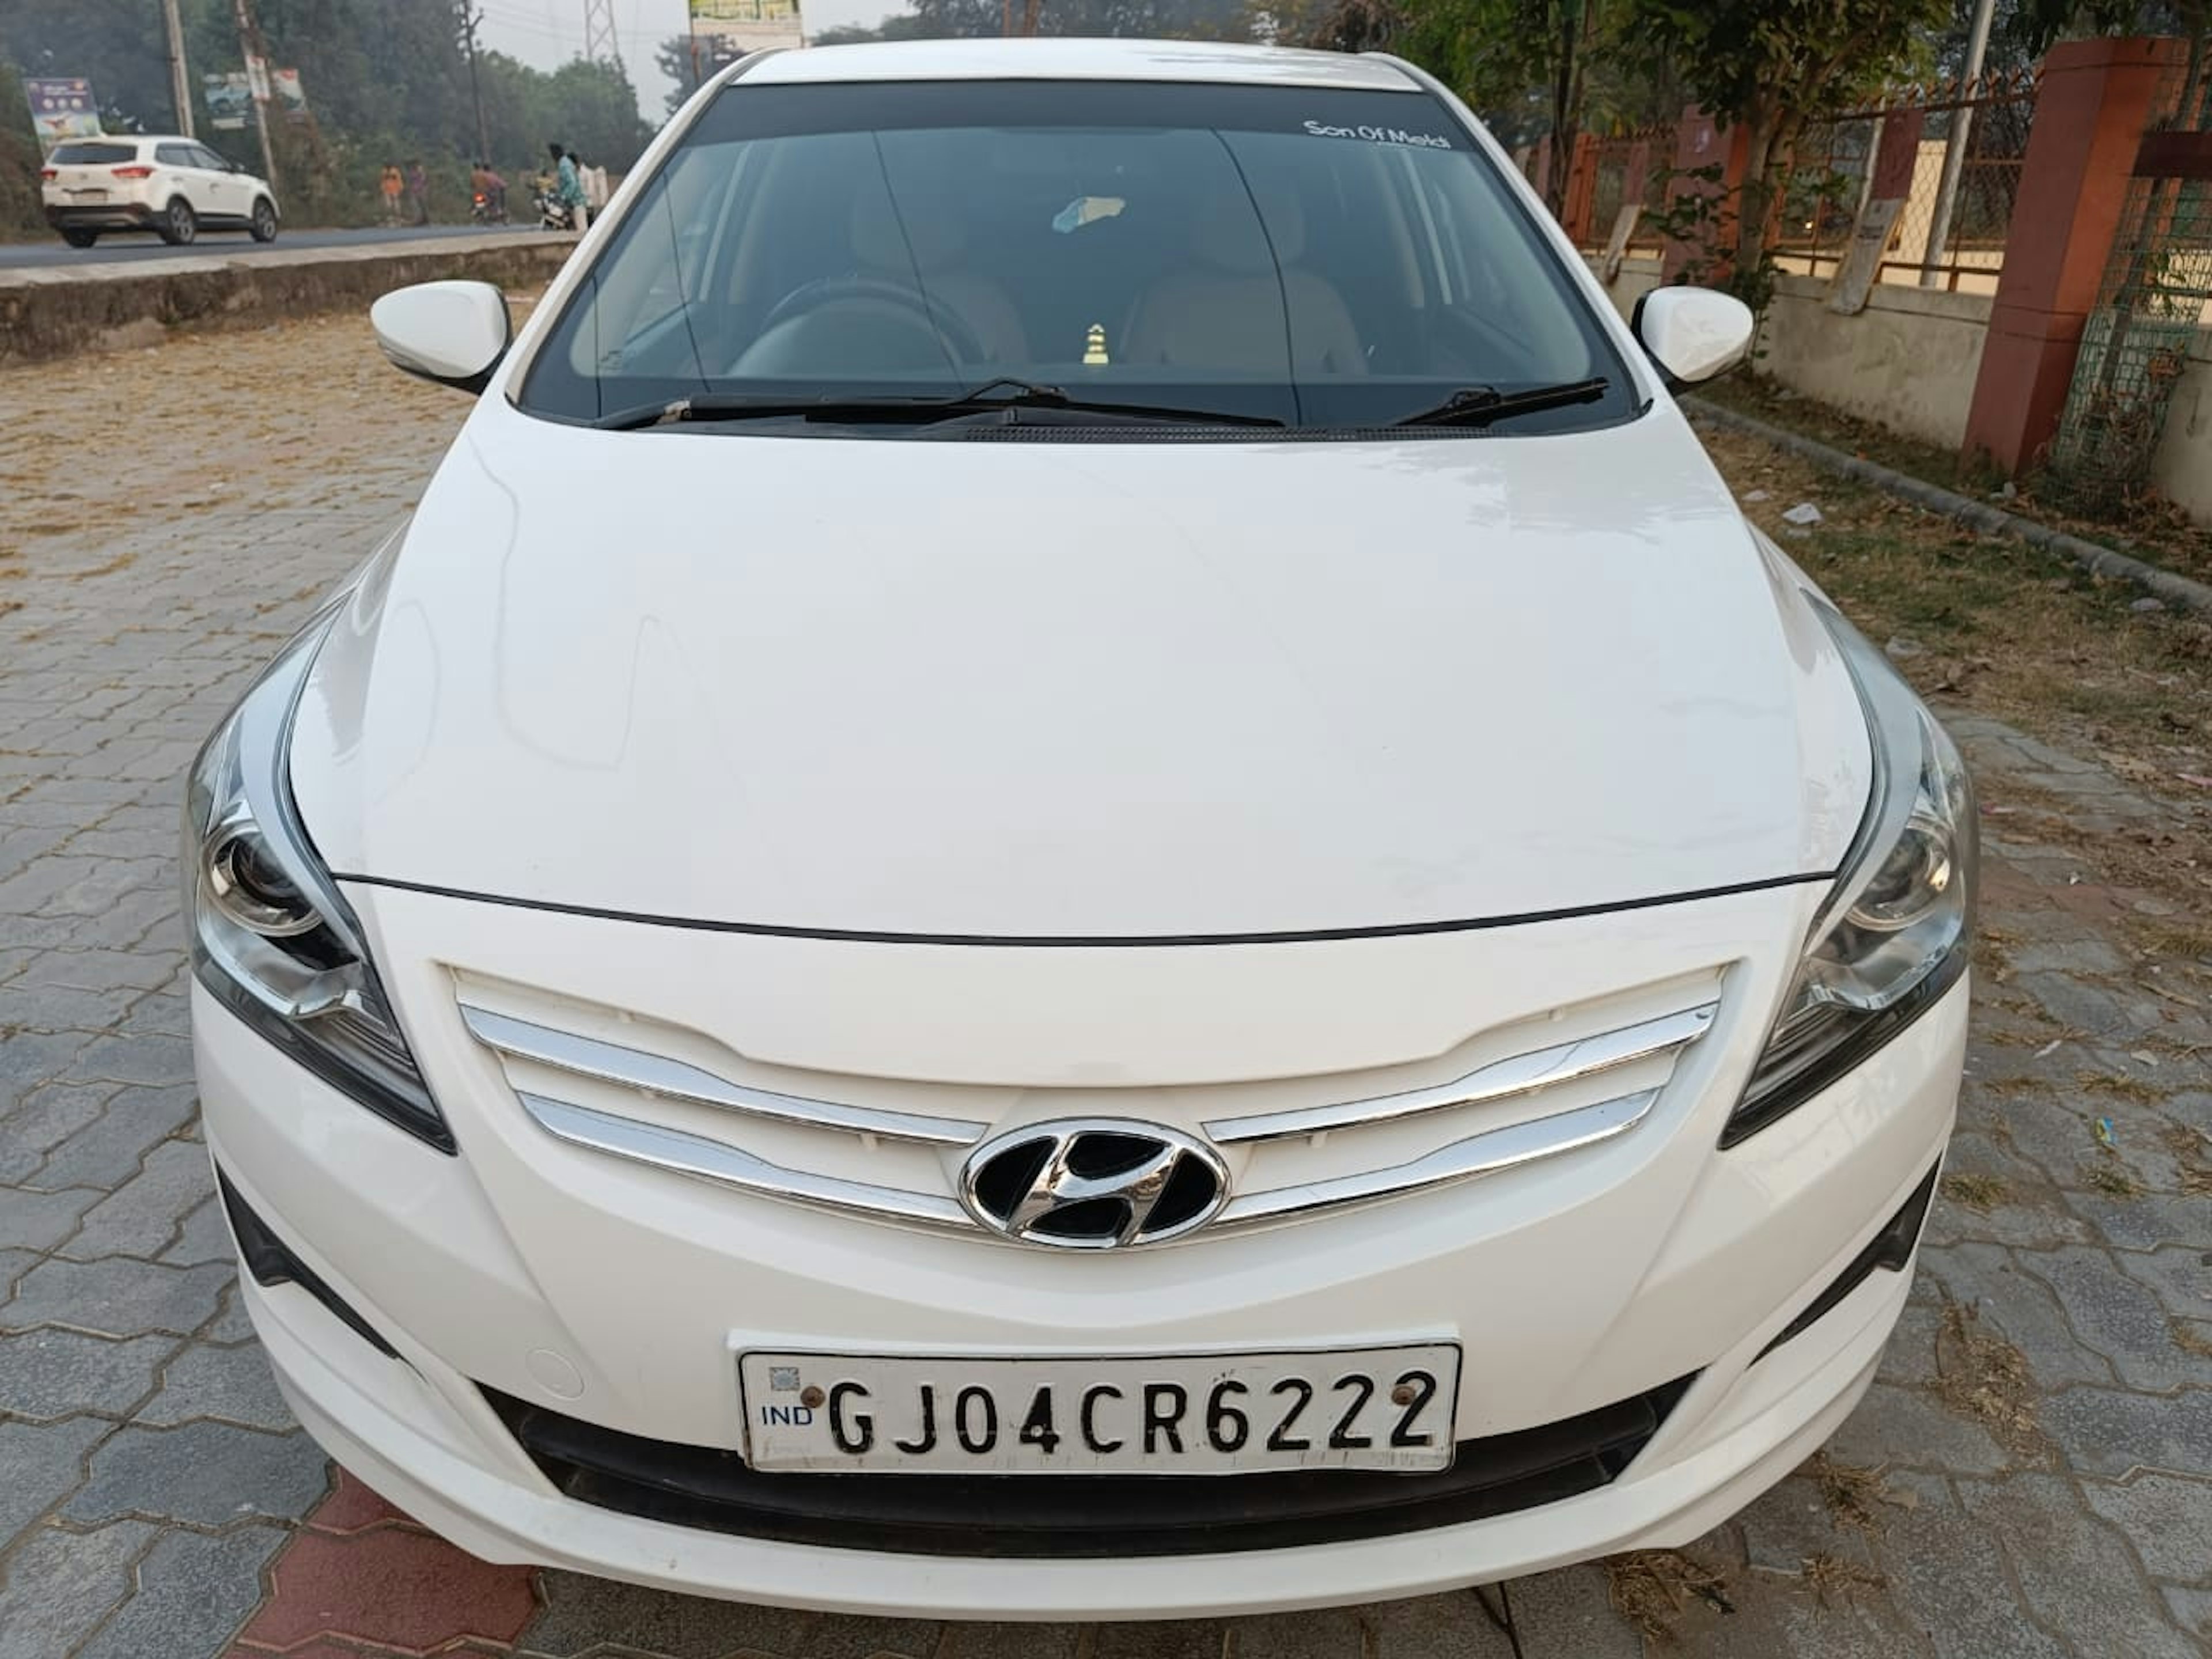 View - Verna photos, Verna available in Ahmedabad, make deal in 600000